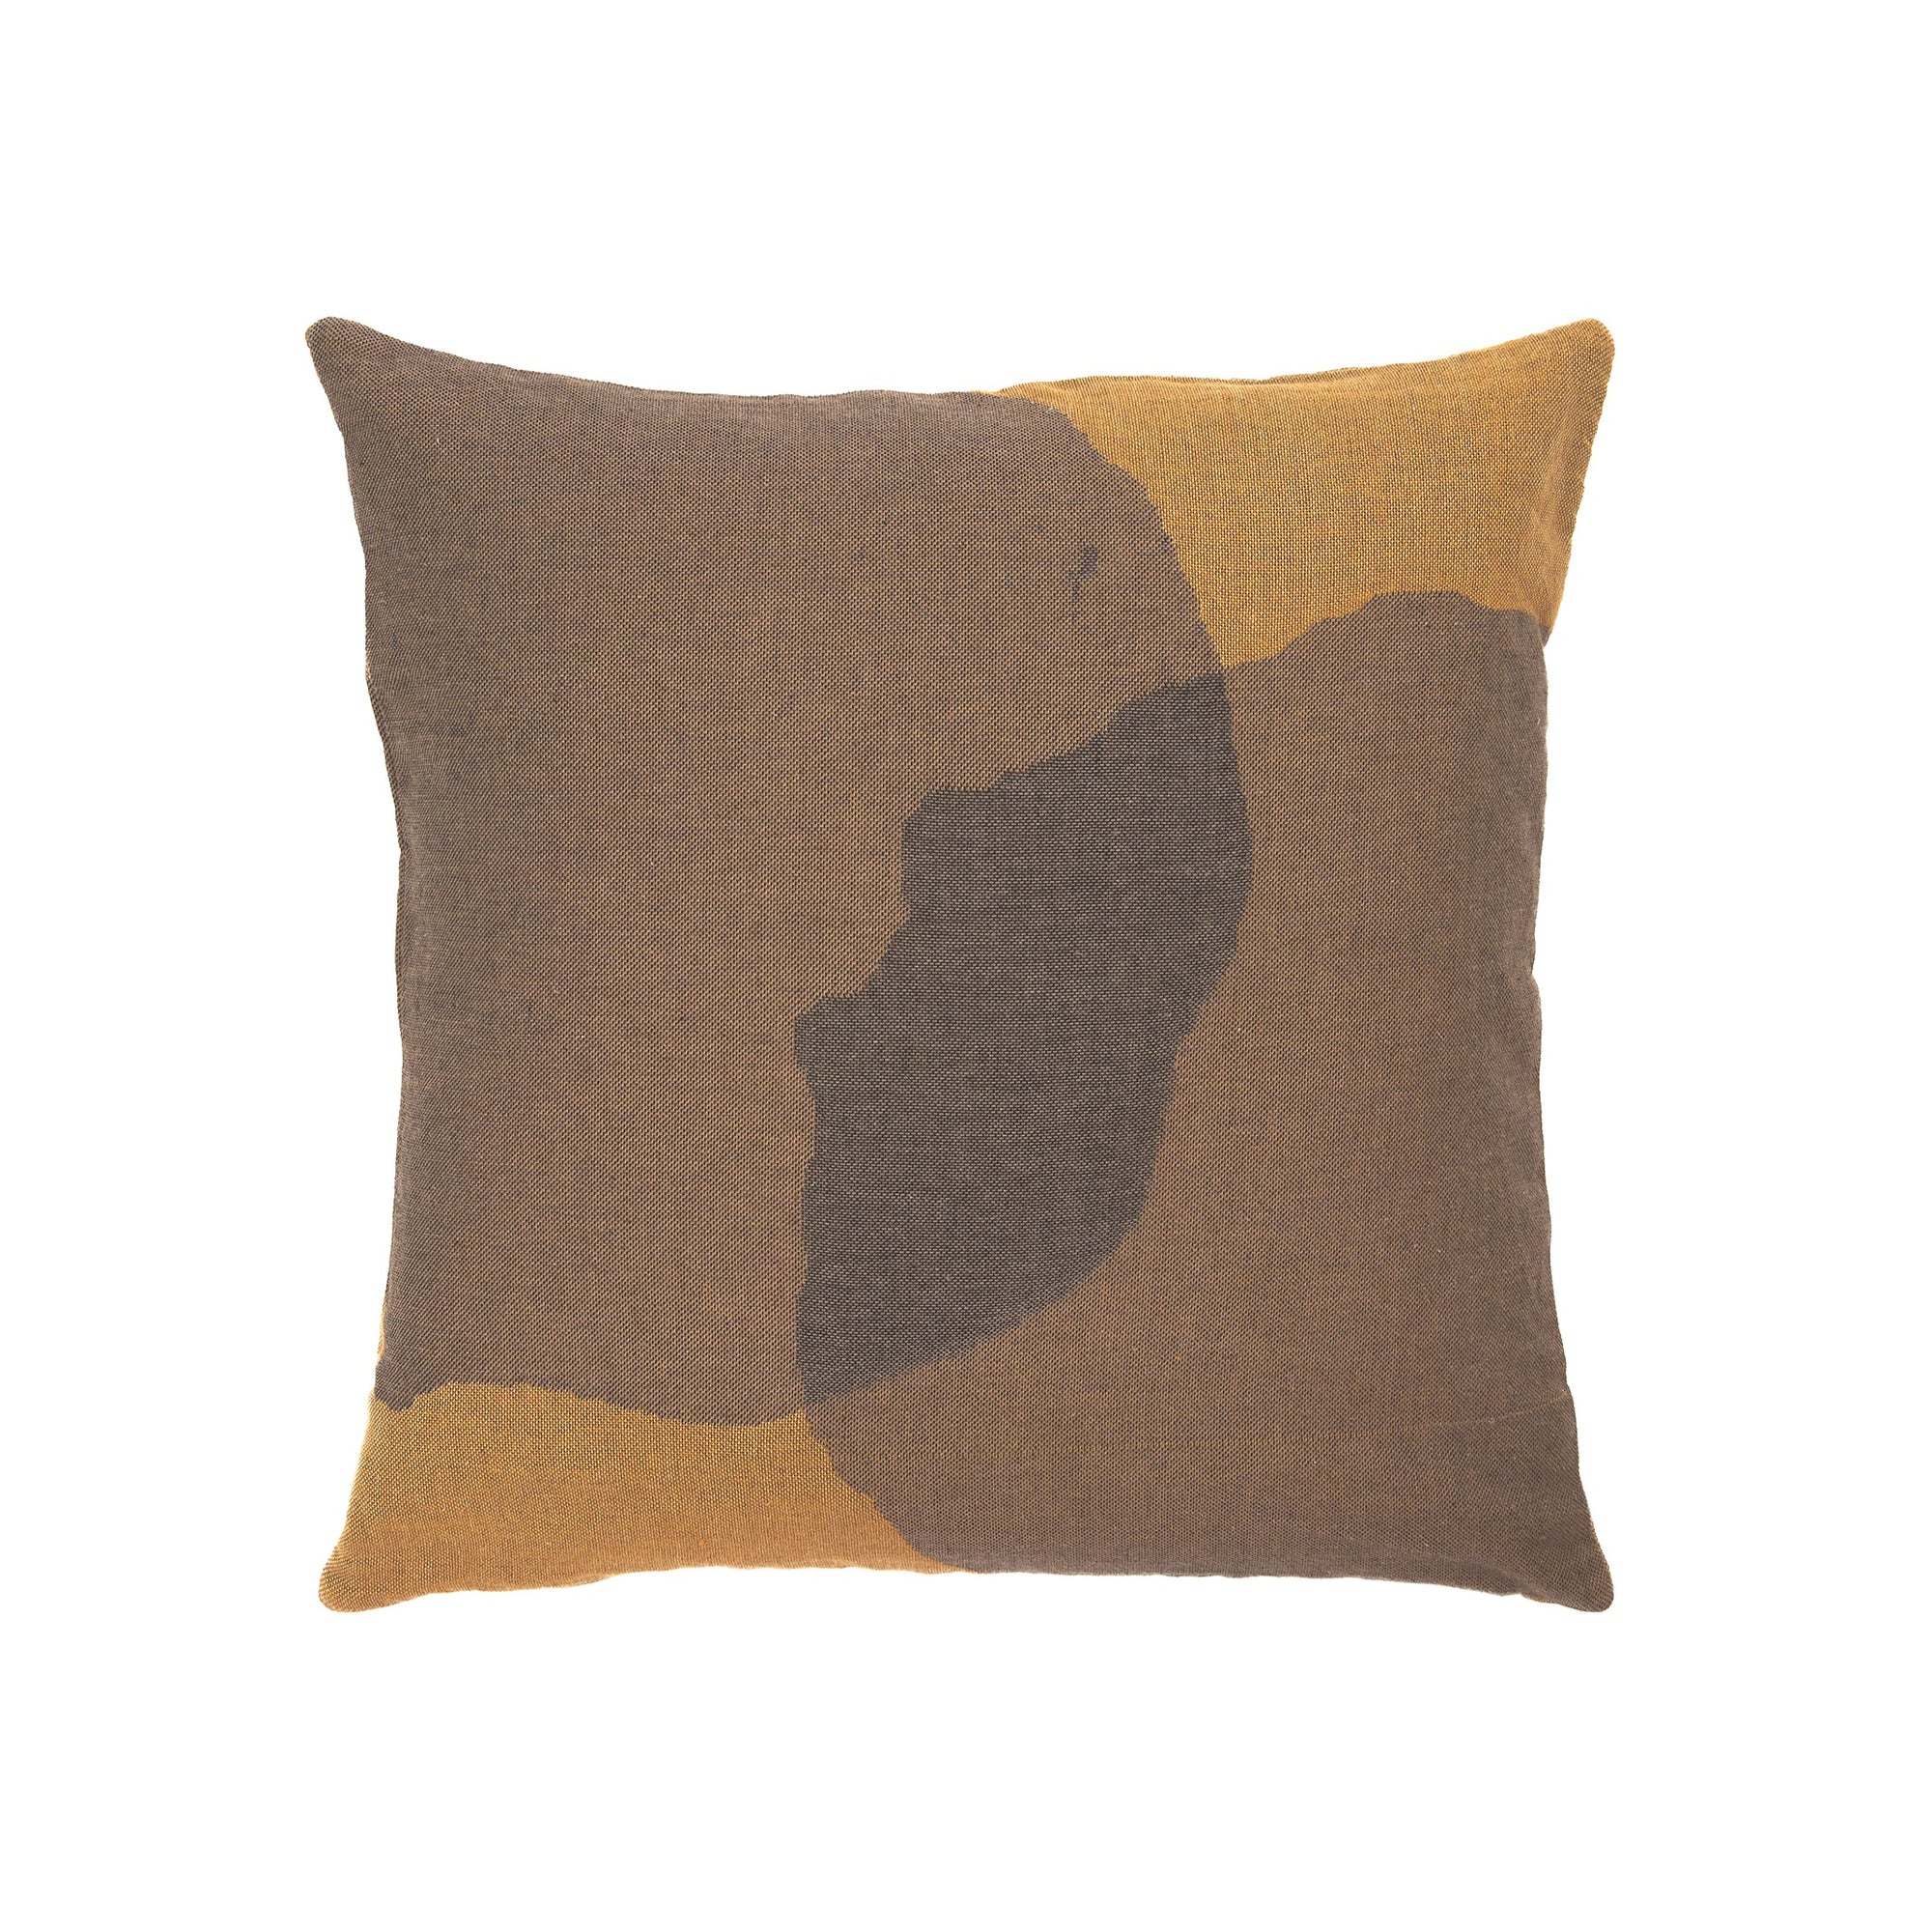 Overlapping Dots cushion